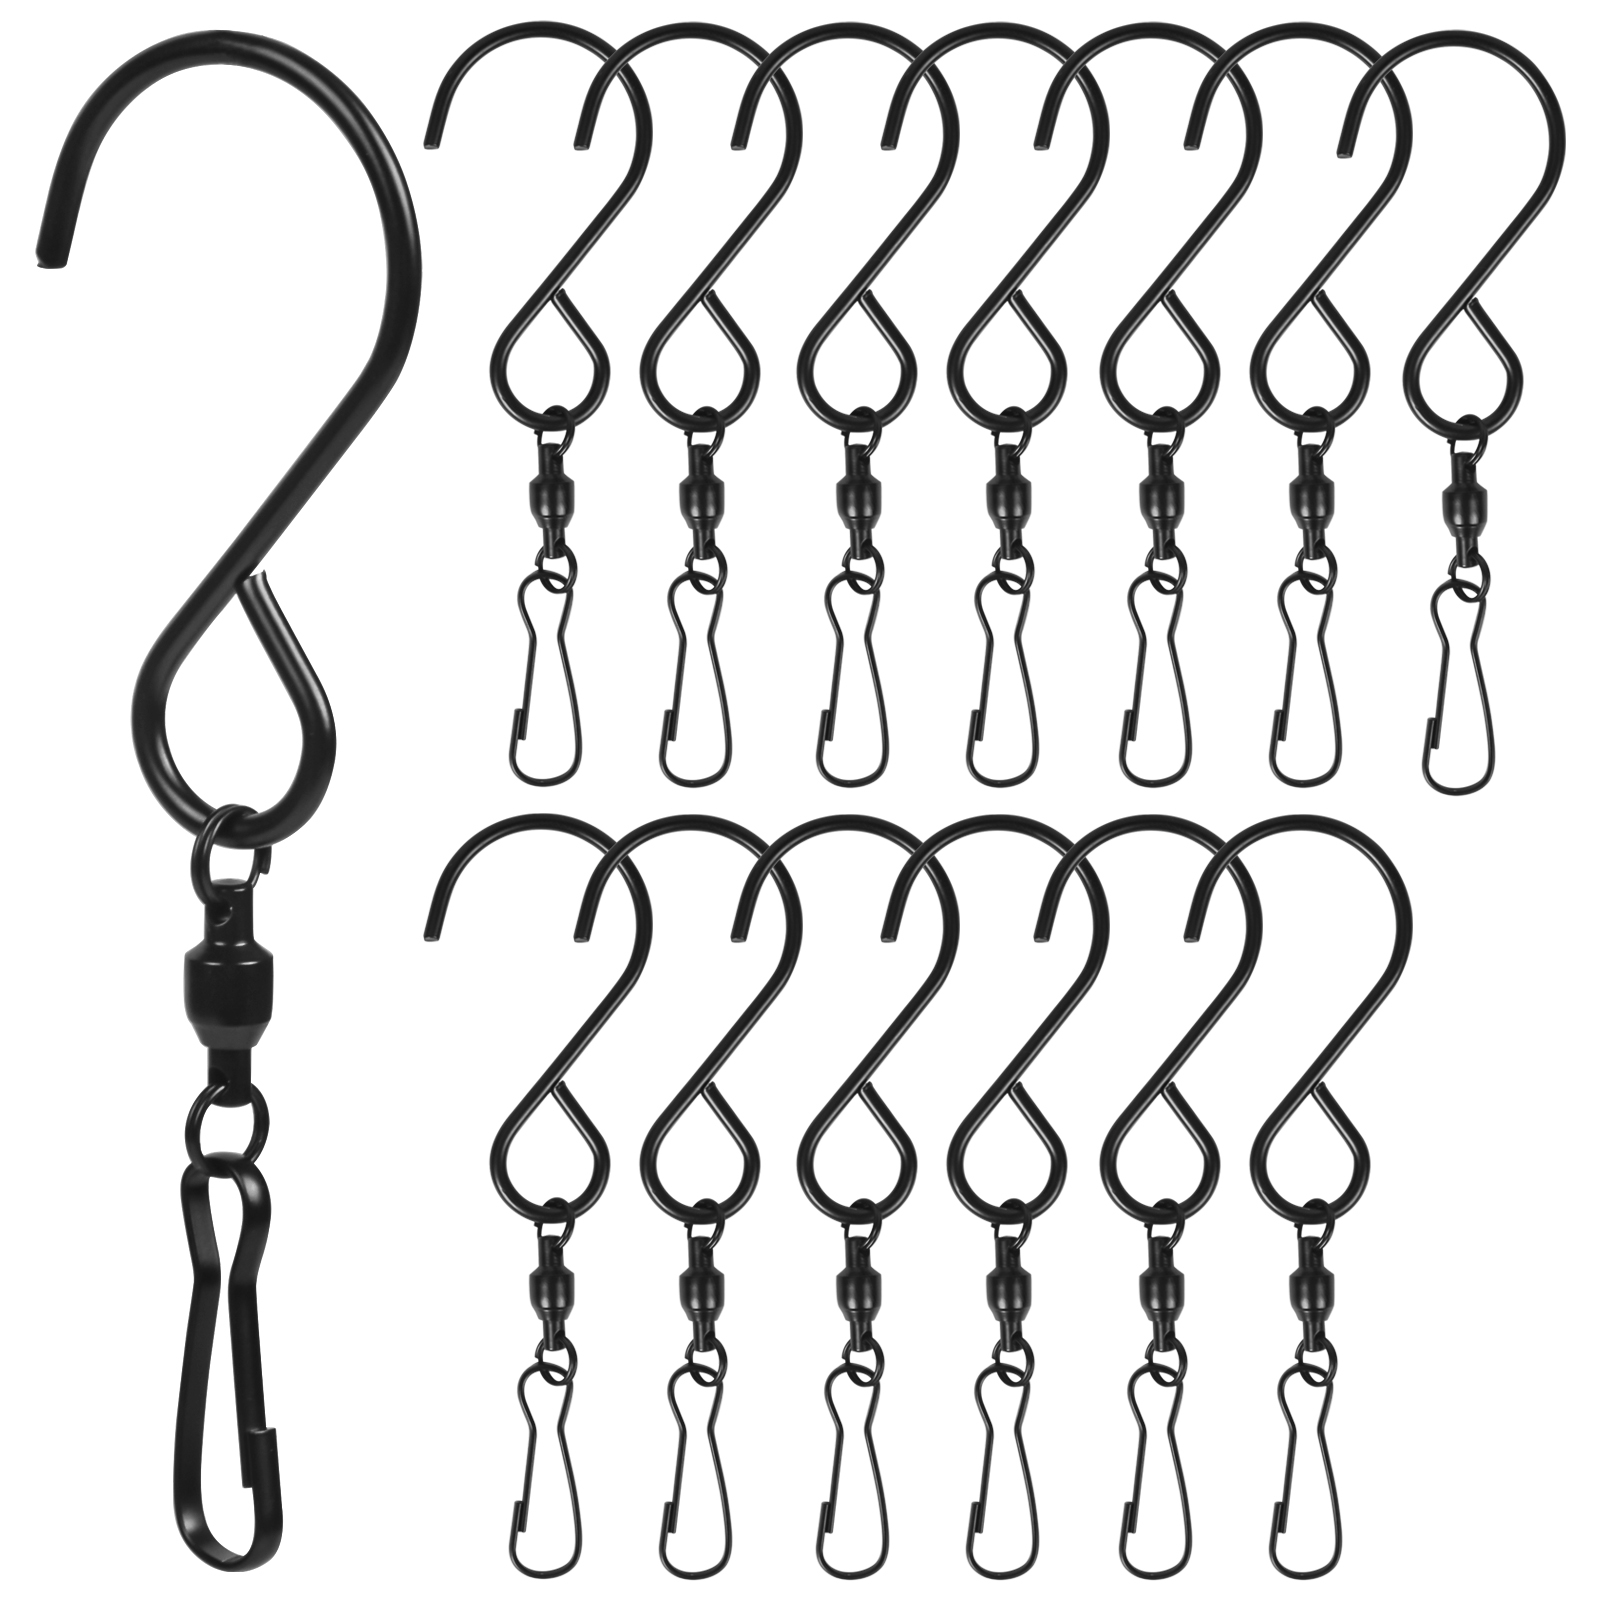 14pcs Stainless Steel Swivel Hooks - Perfect for Garden Wind Spinners &  More!